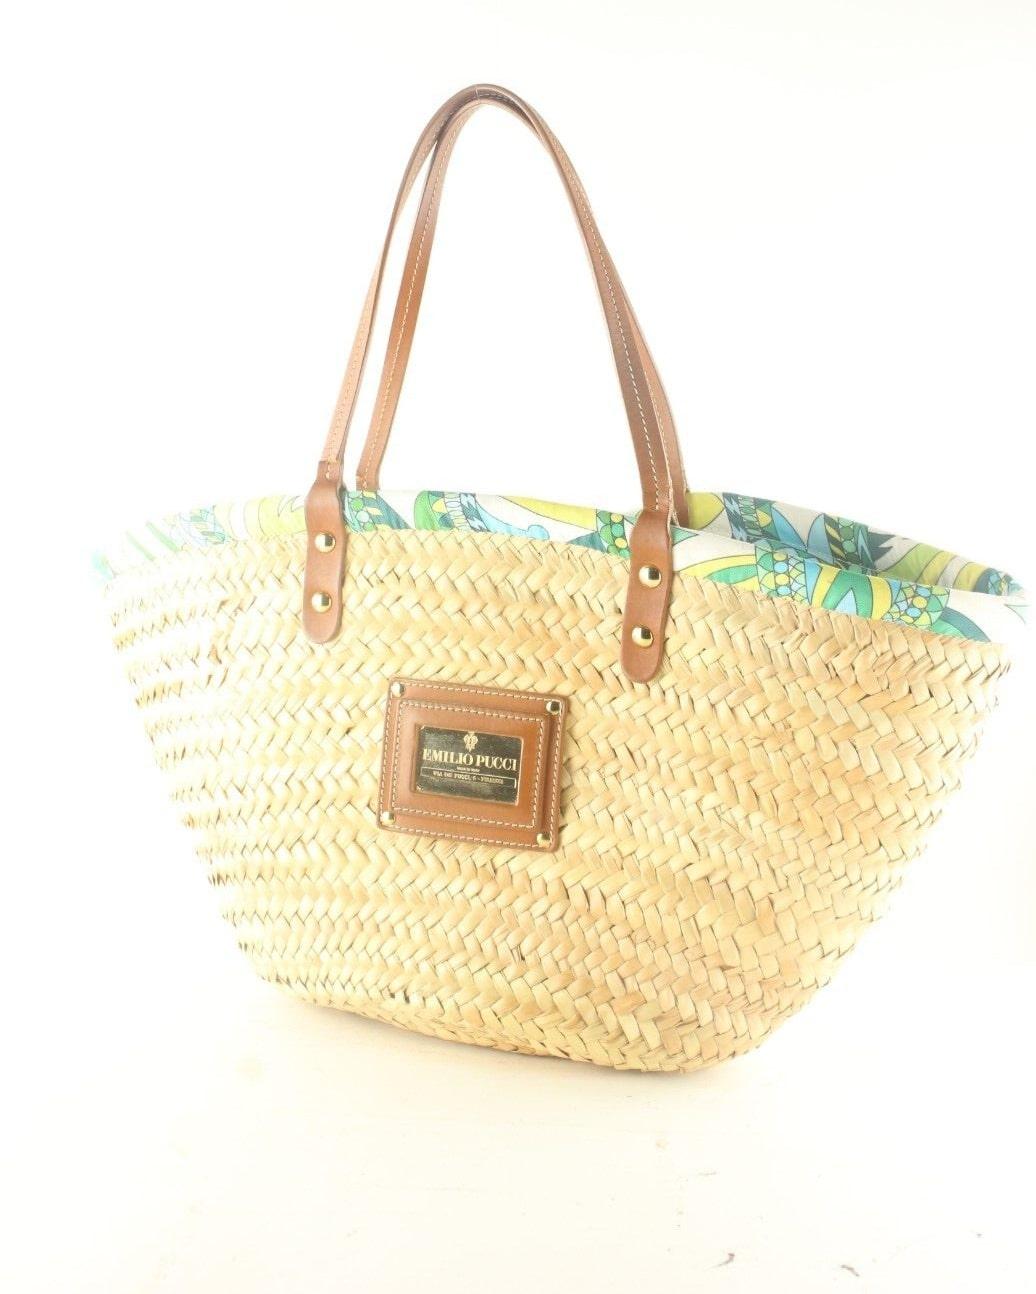 Emilio Pucci Wicker Basket Tote 1EP1026K In Fair Condition For Sale In Dix hills, NY